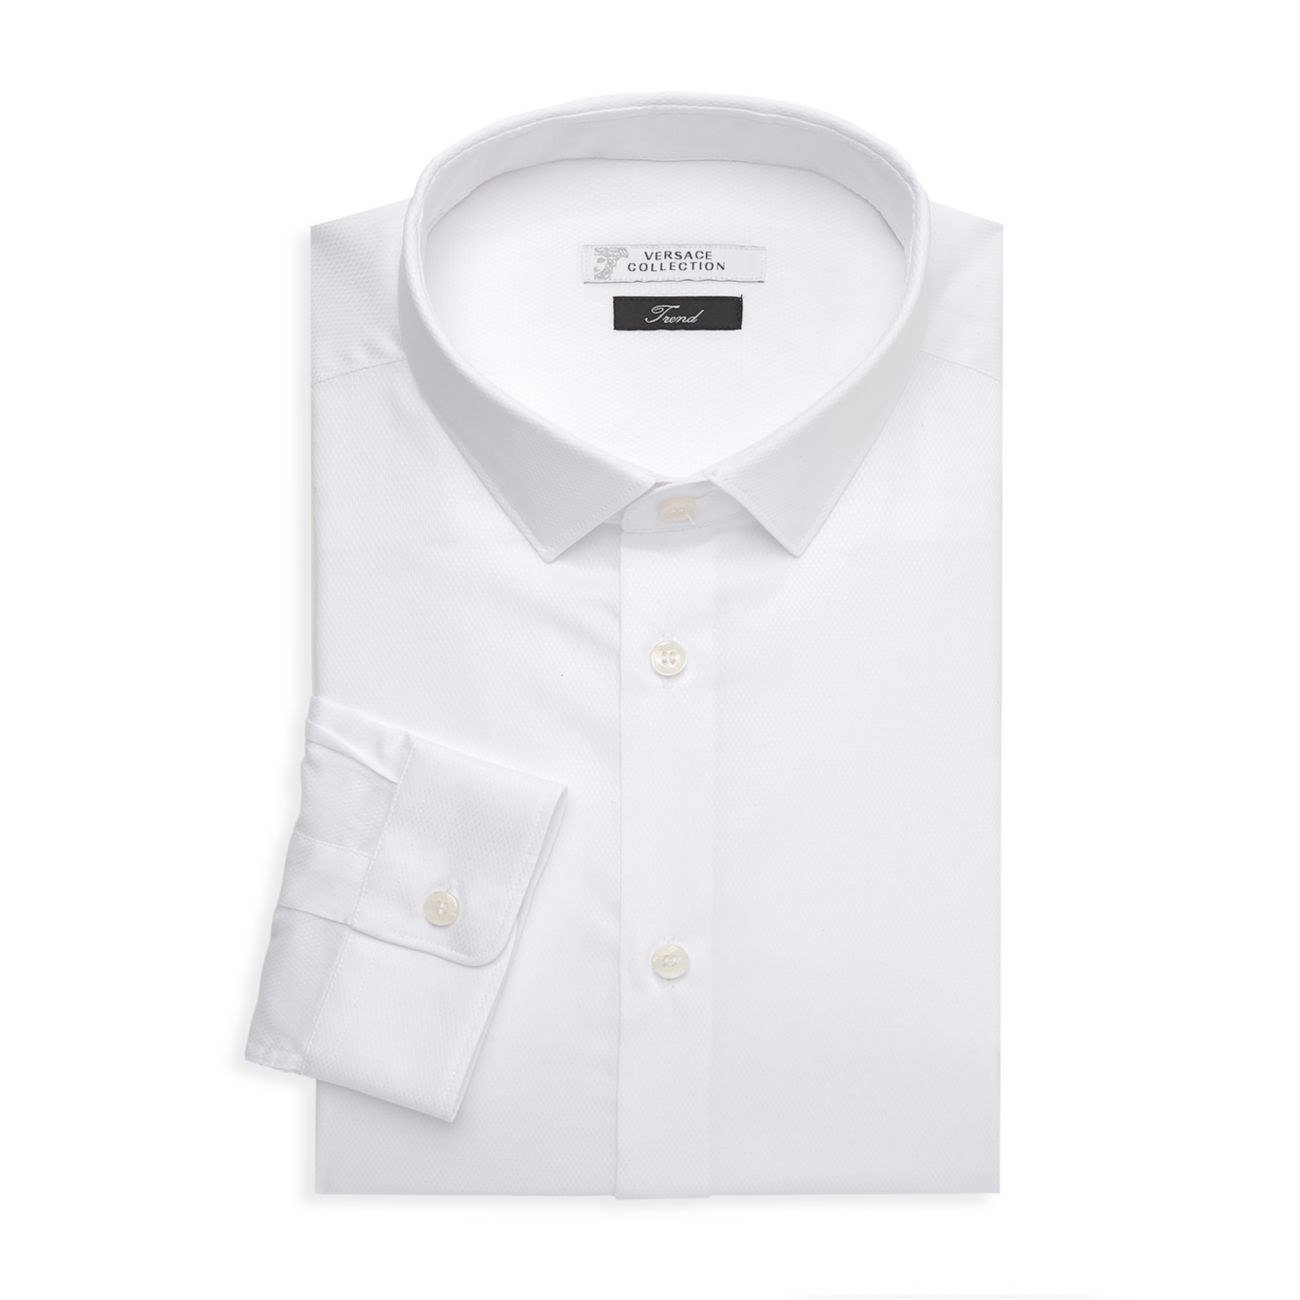 Trend-Fit Long-Sleeve Dress Shirt Versace Collection